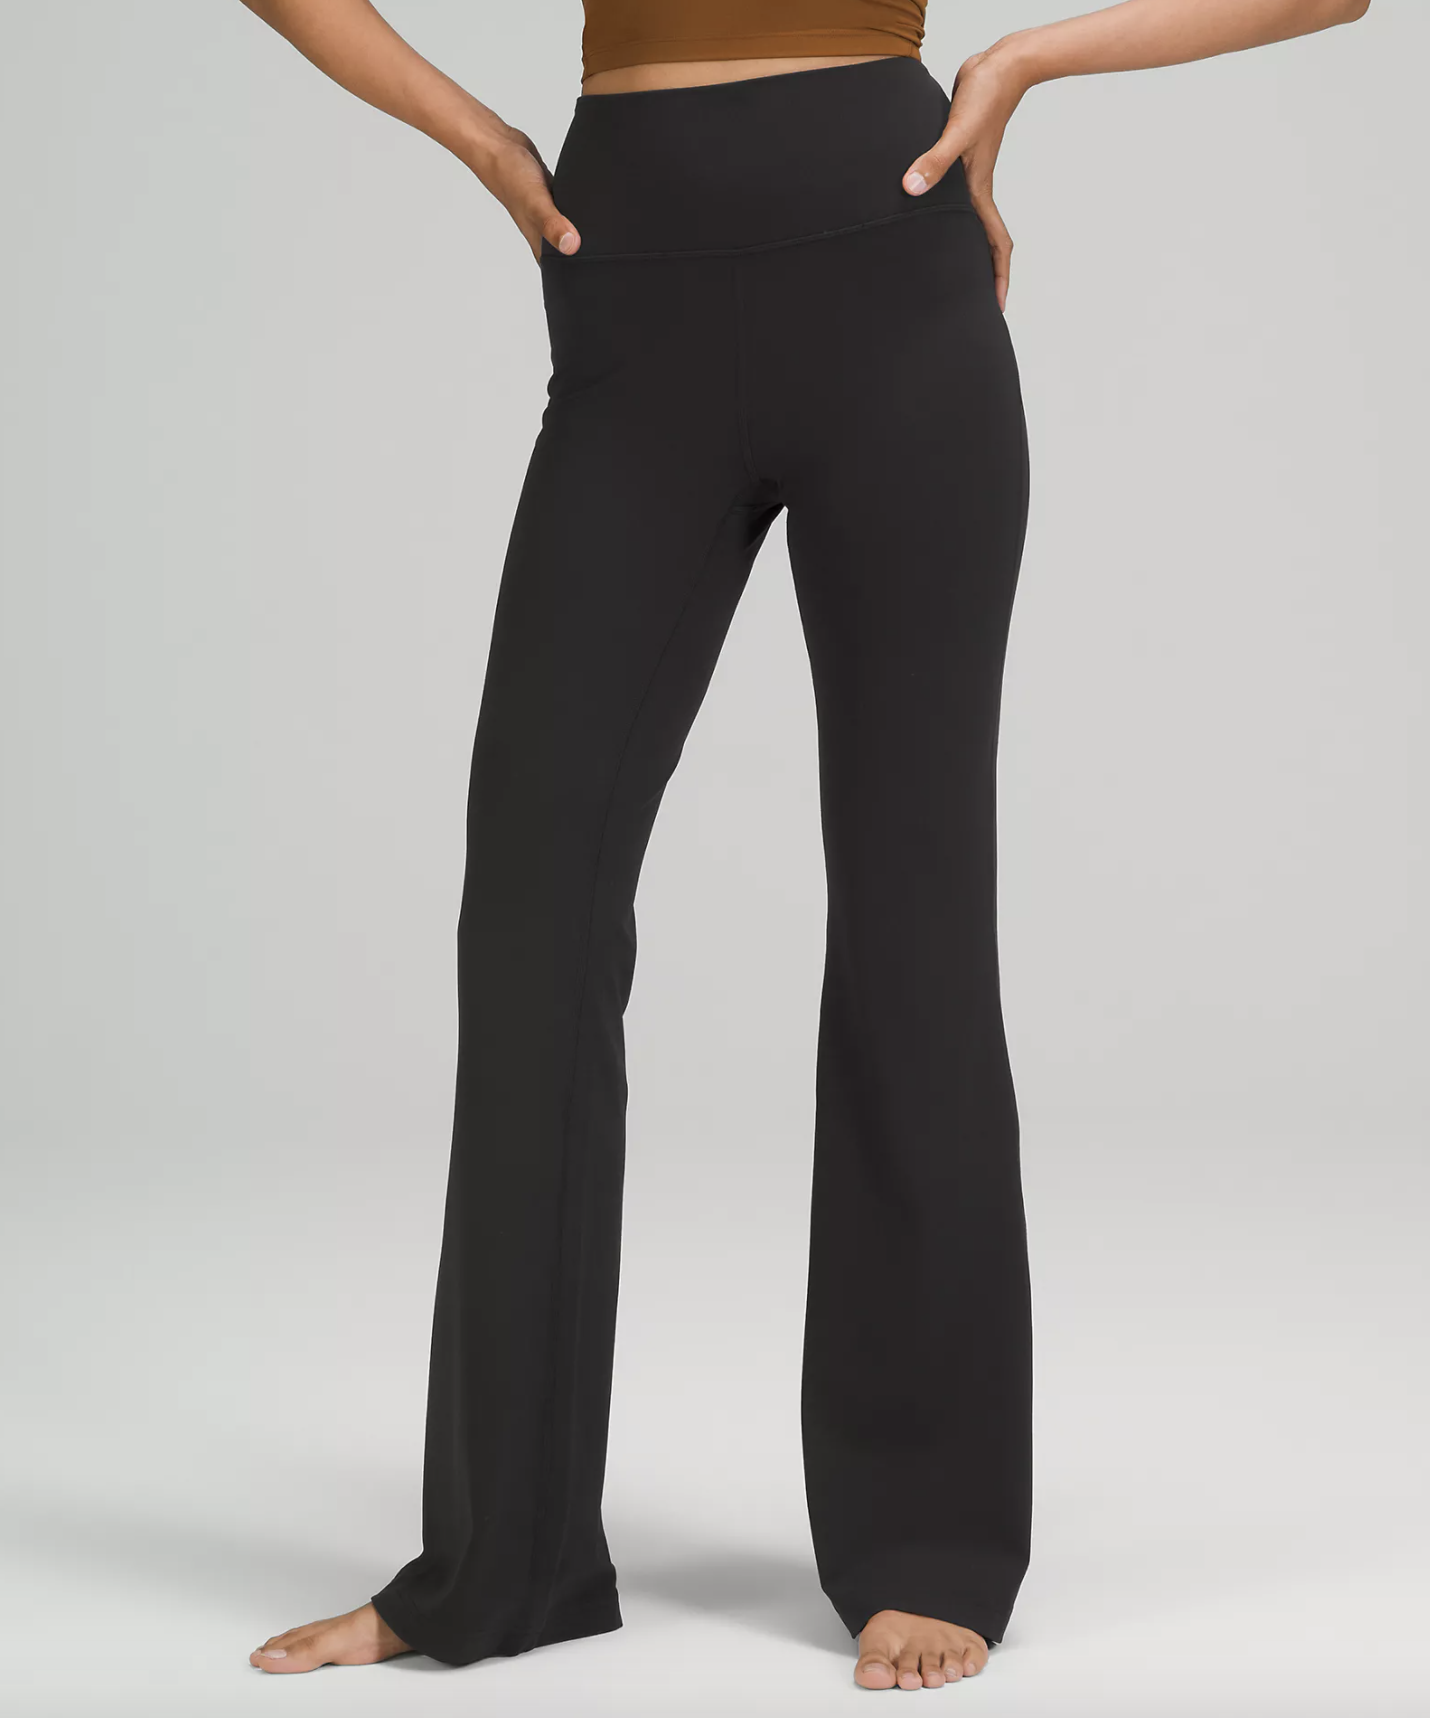 Buy Wide Leg Pants With Side Draw String Bell Bottom Pants Yoga Online in  India  Etsy